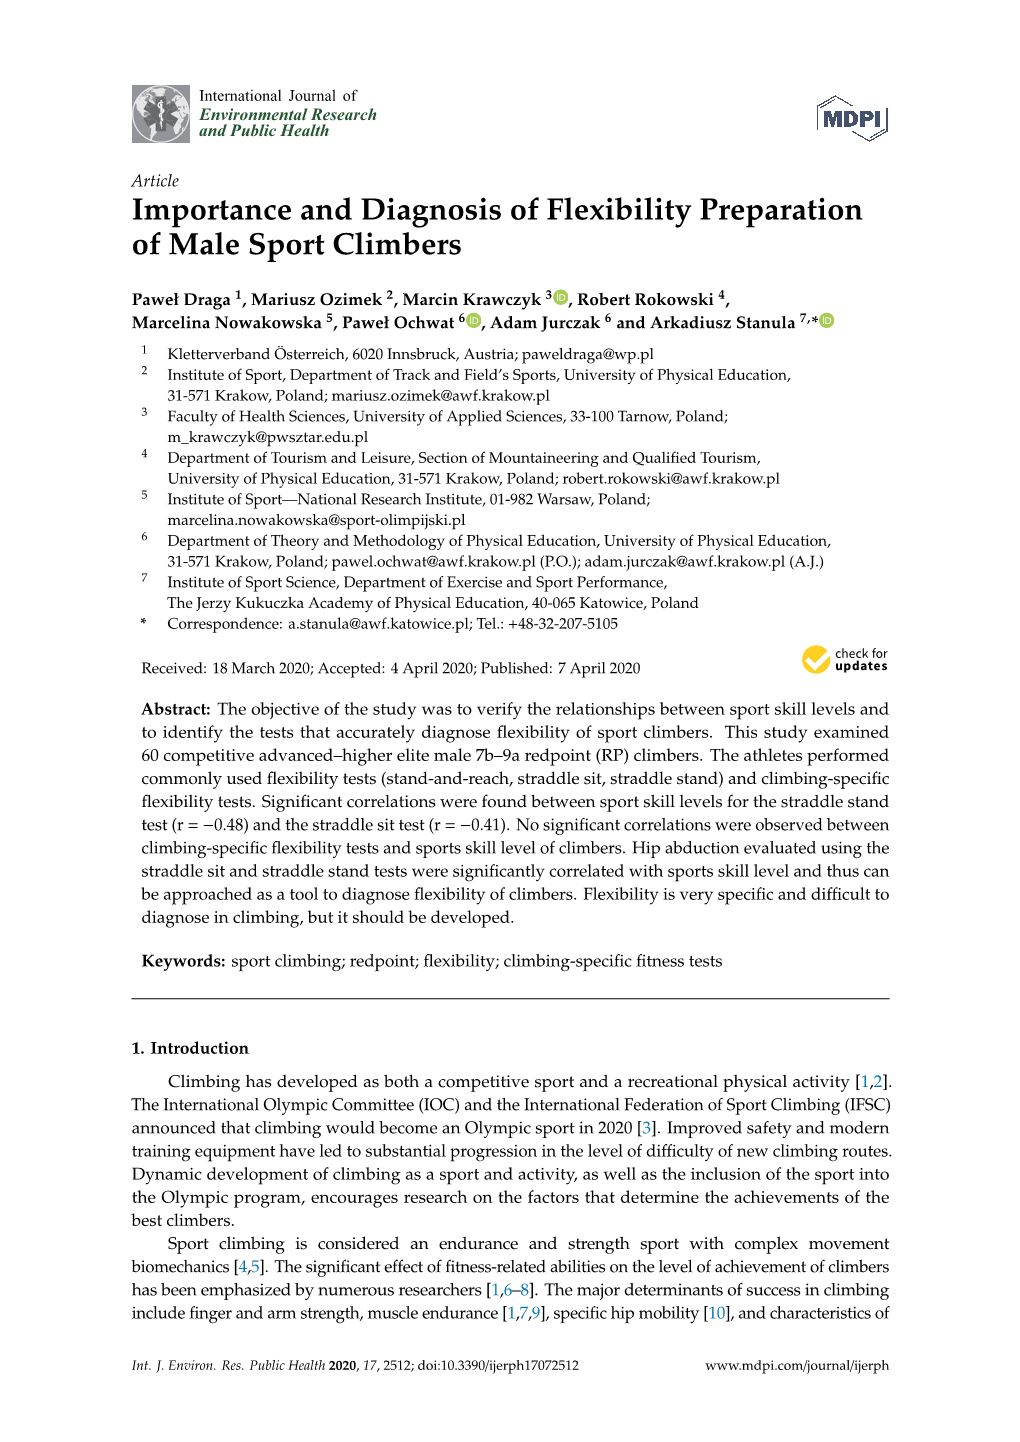 Importance and Diagnosis of Flexibility Preparation of Male Sport Climbers